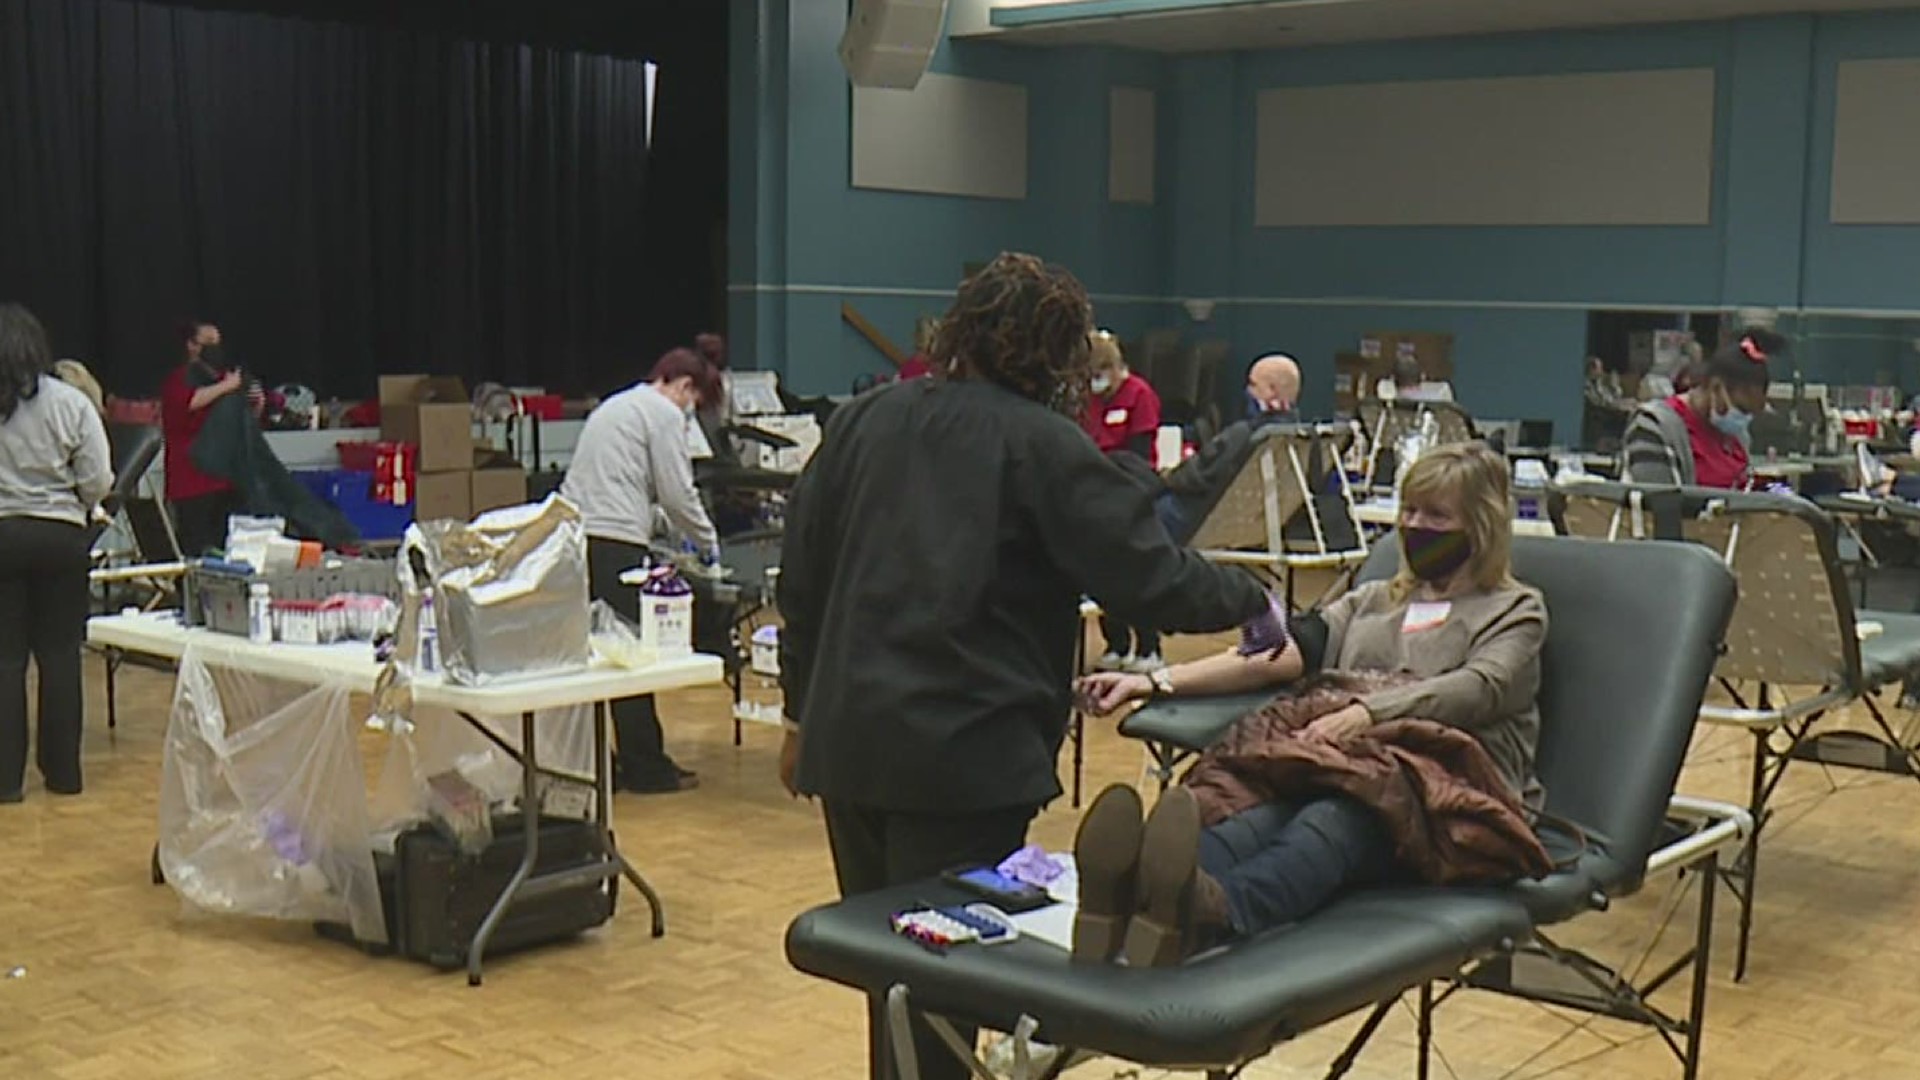 The American Red Cross and FOX43 teamed up for a blood drive Thursday at the York Jewish Community Center.